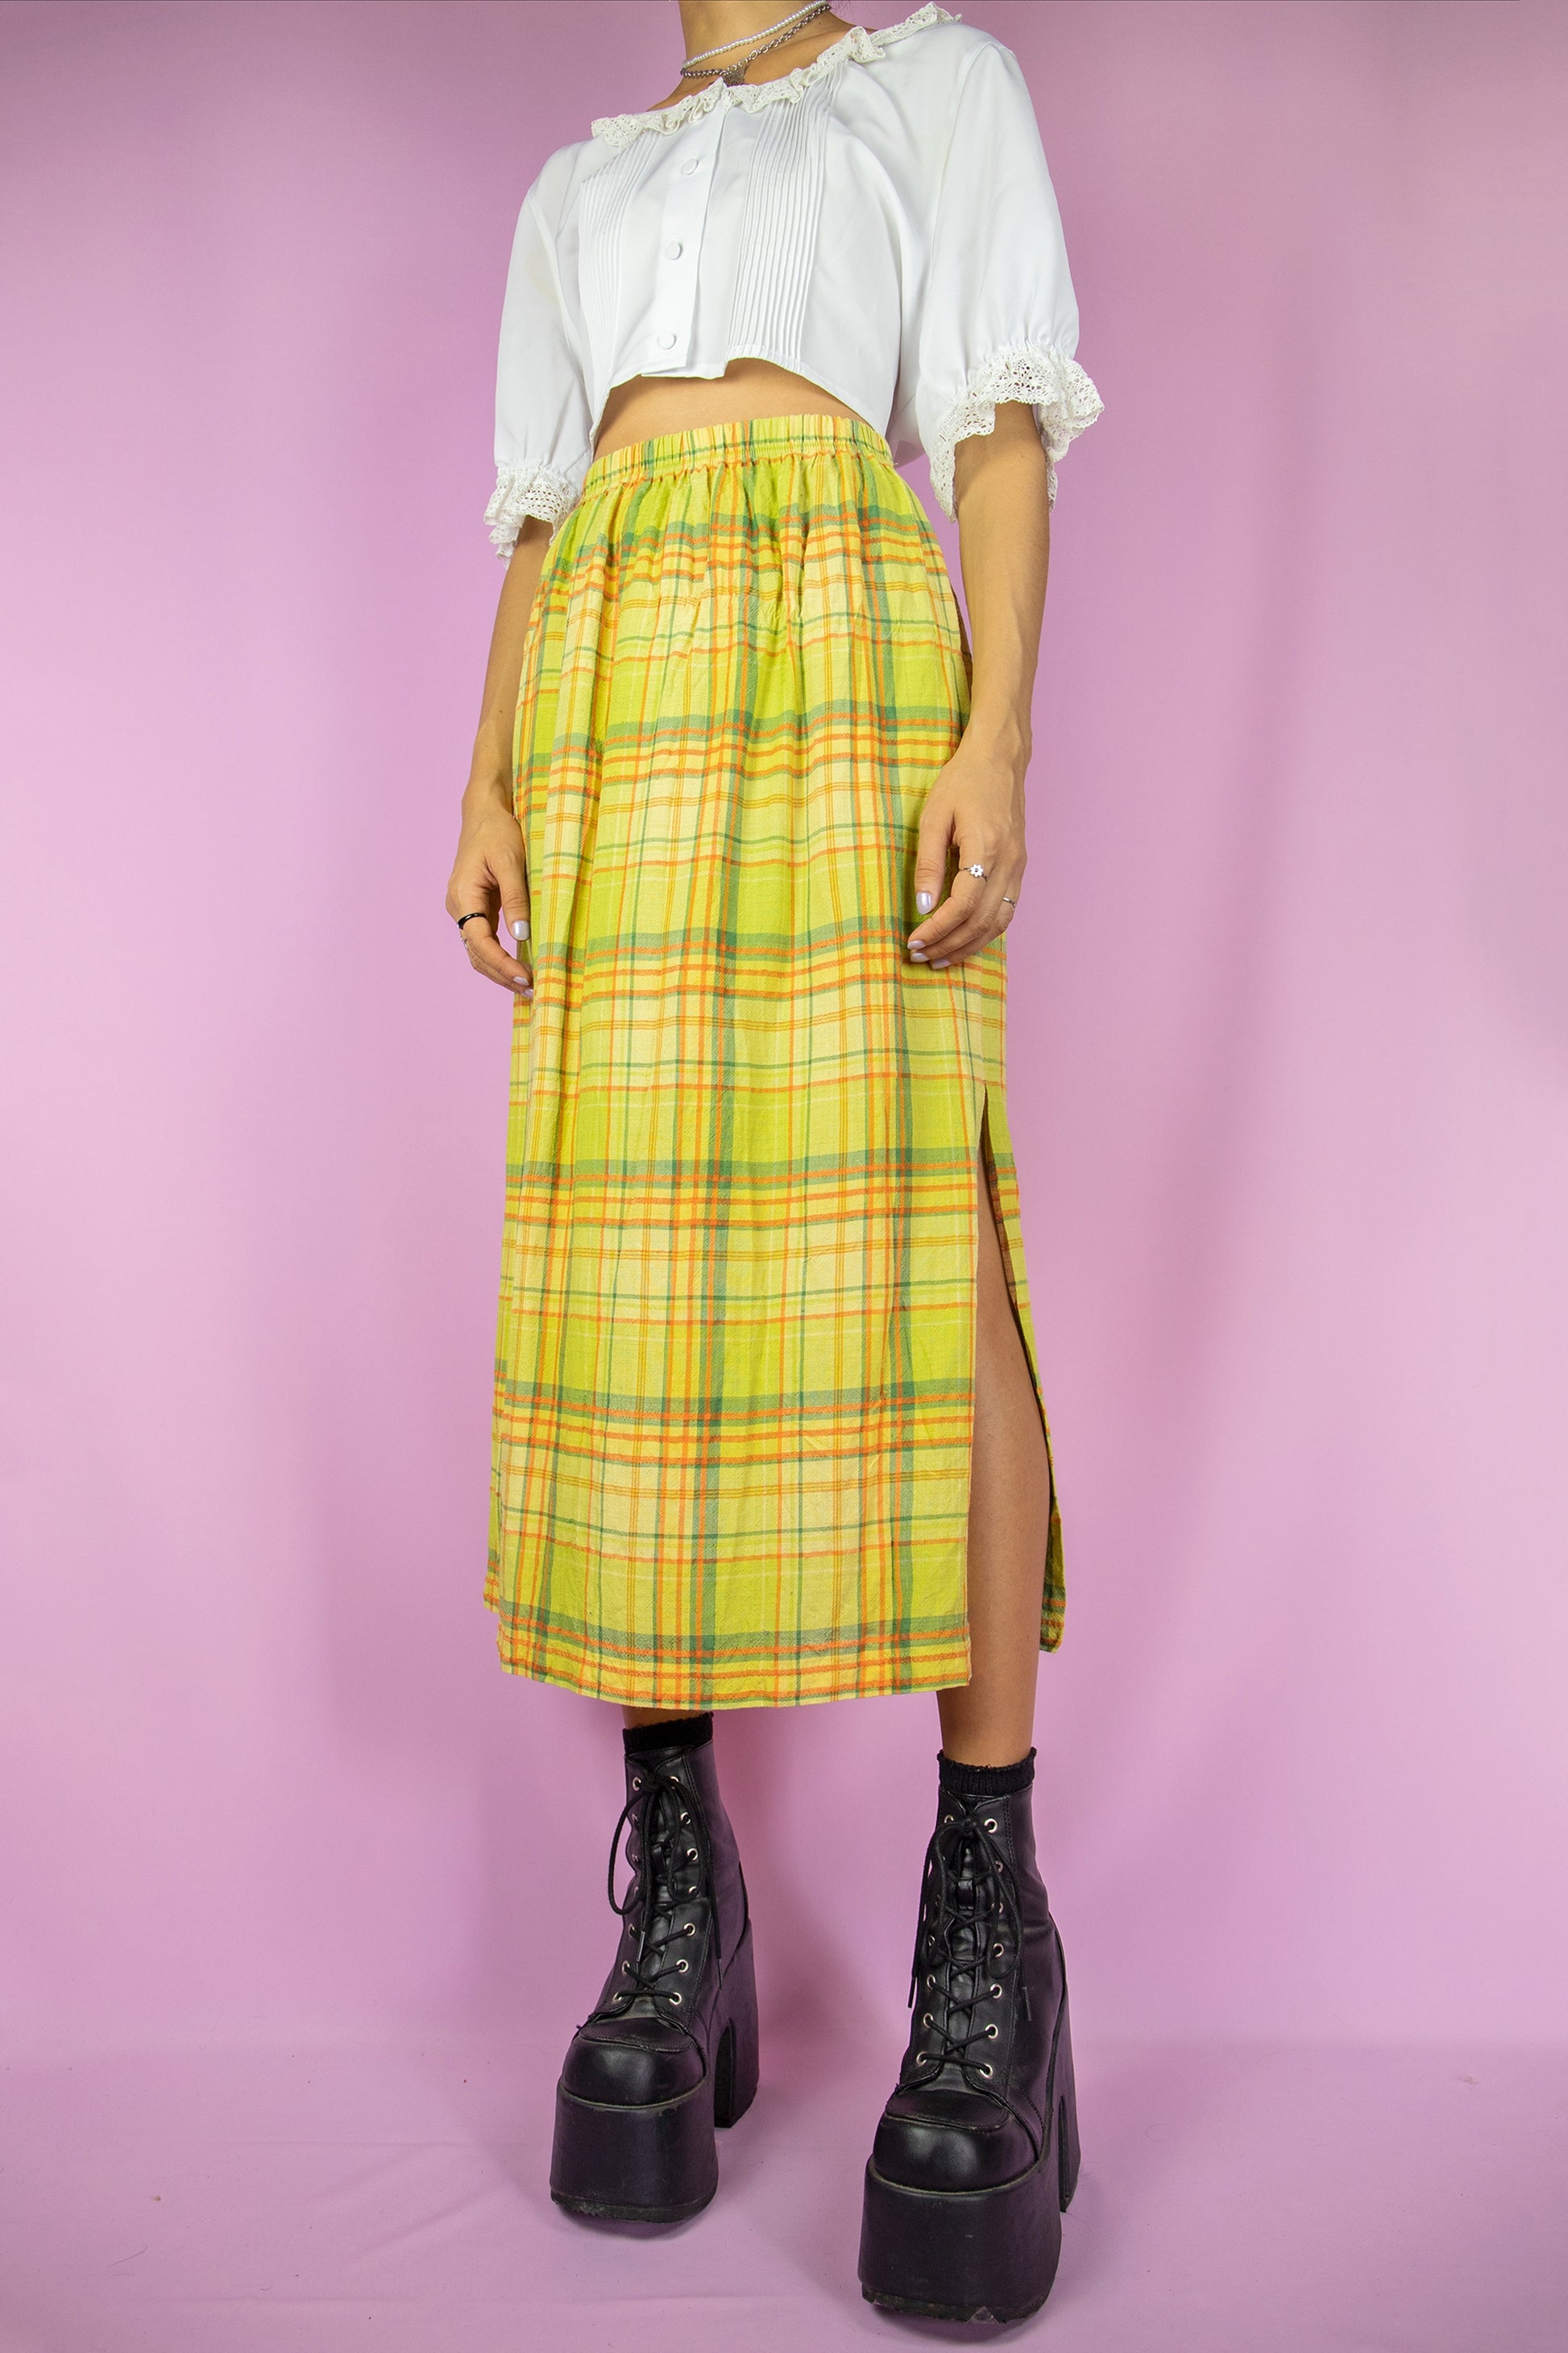 The Vintage 90s Green Plaid Midi Skirt is a long, green, yellow, and orange checkered skirt featuring a side slit and elastic waist. Cottage prairie 1990s boho summer skirt.